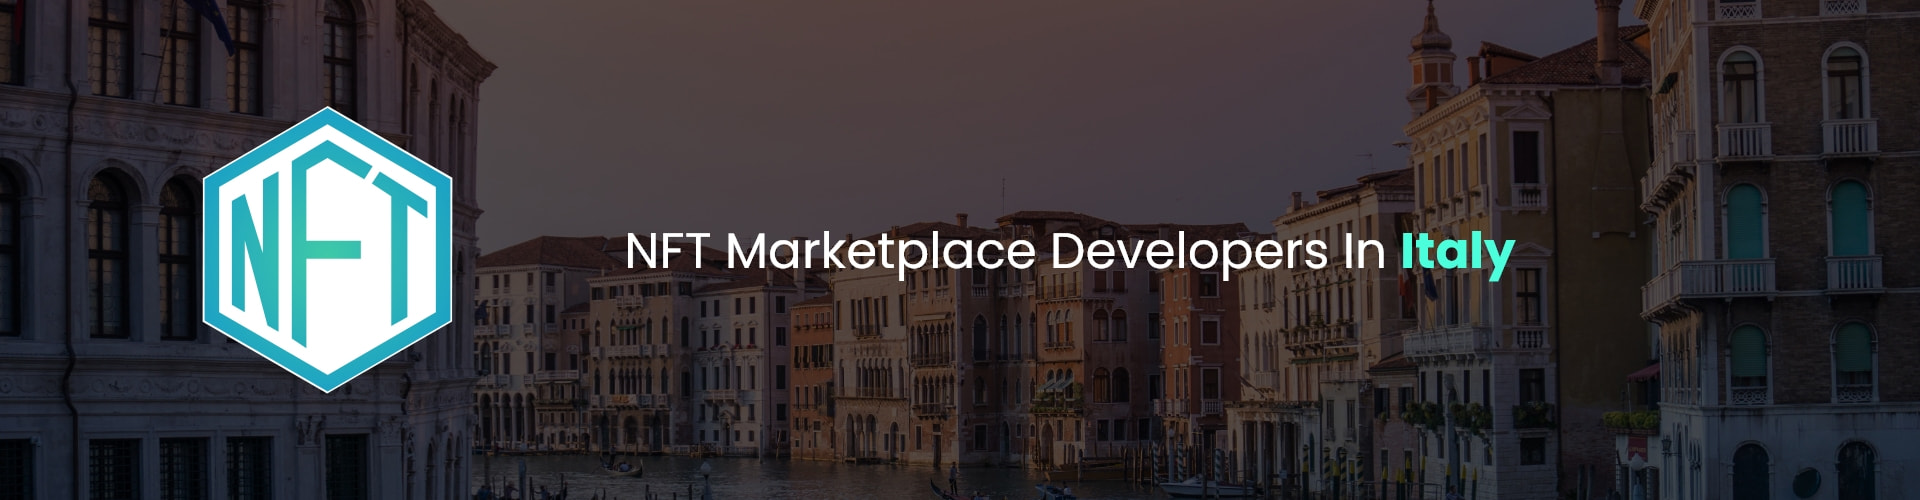 hire nft marketplace developers in Italy